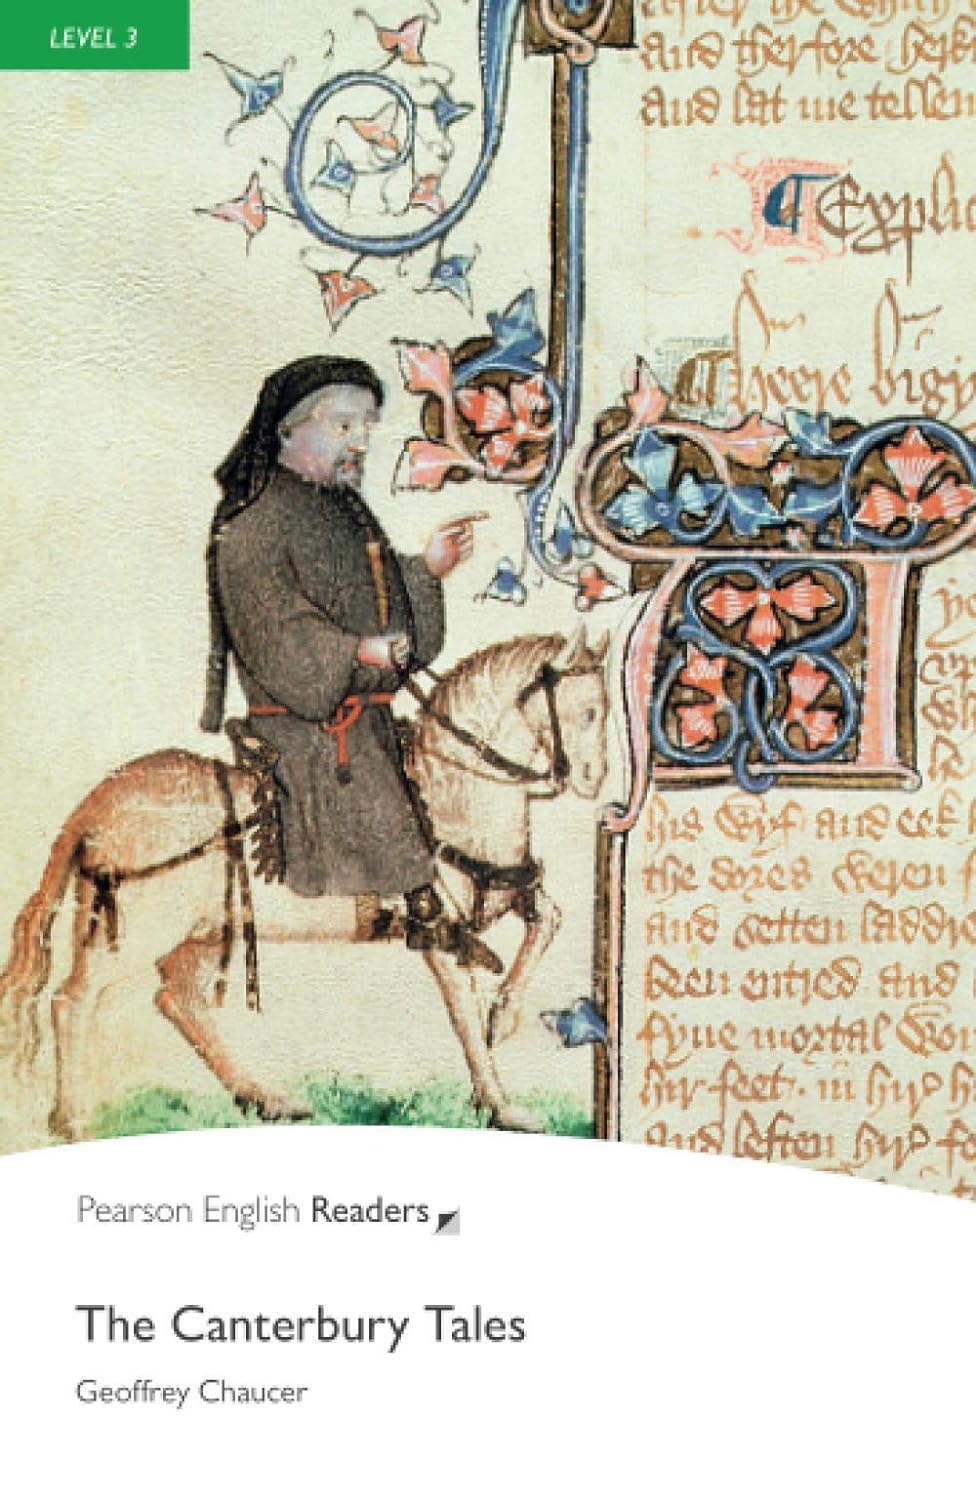 literature_cover_the_canterbury_tales